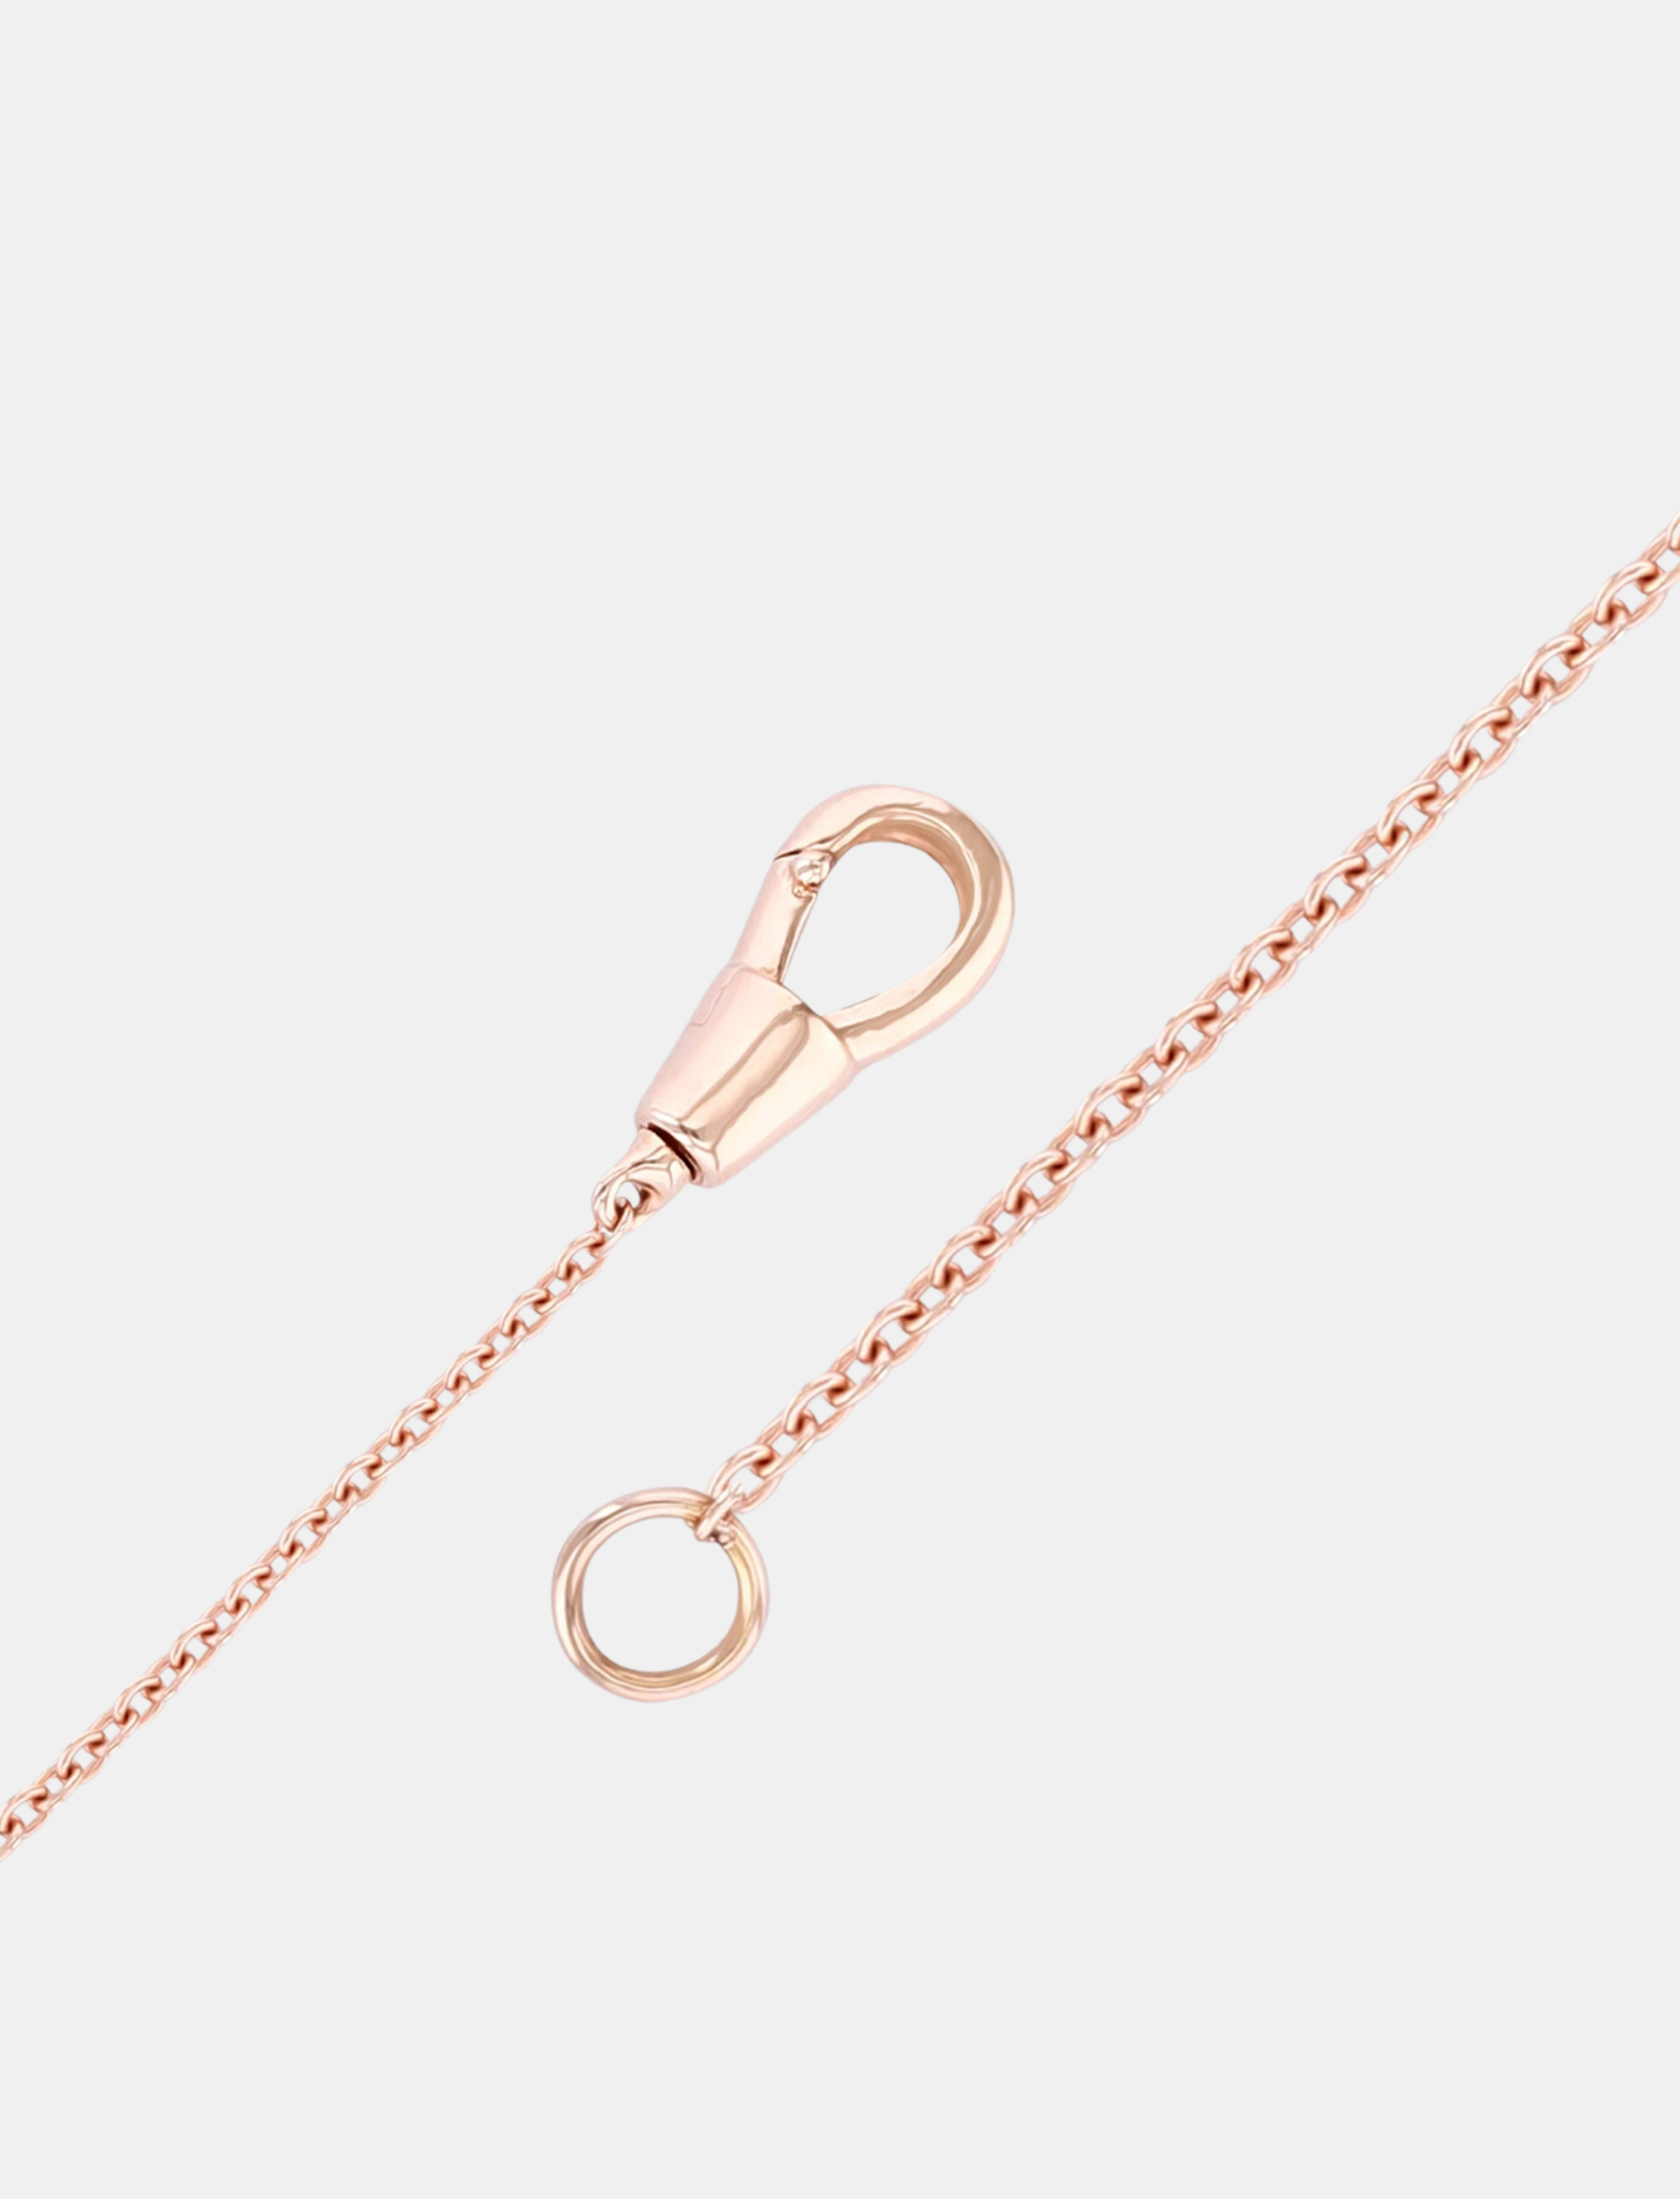 Small Gold Hook on Simple Chain